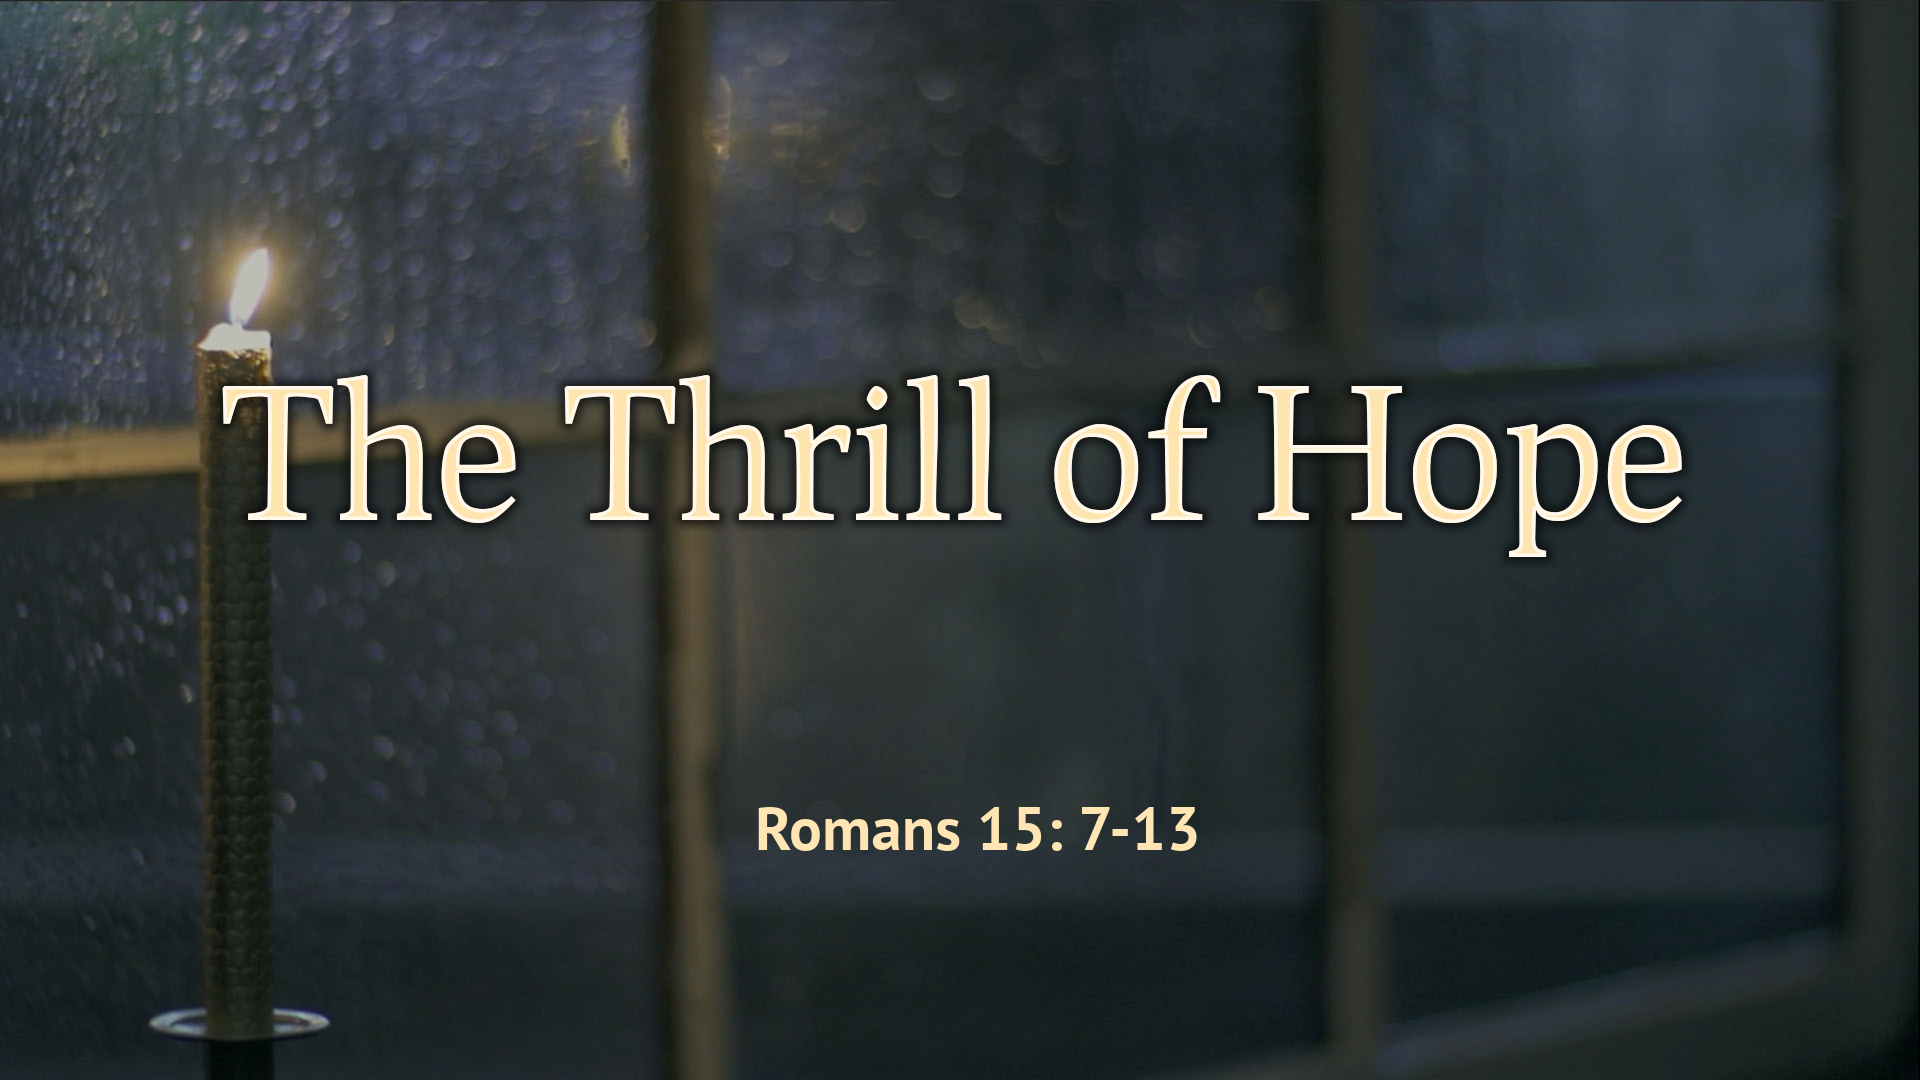 Oct 16, 2022 - The Thrill of Hope (Video) - Romans 15: 7-13